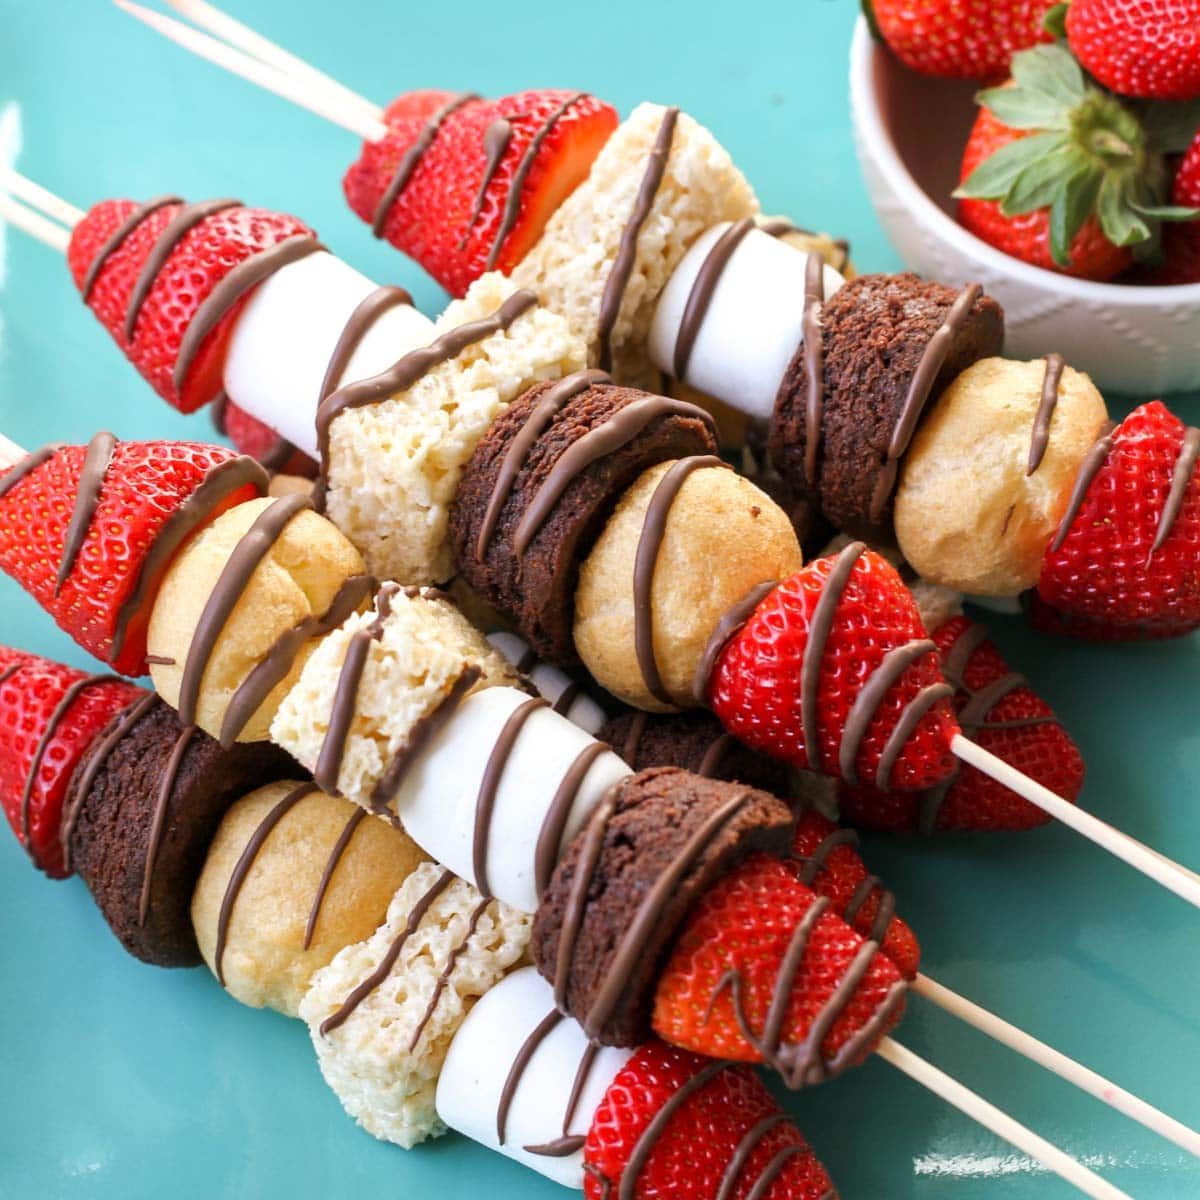 Valentines Dinner Ideas - dessert kabobs on wooden skewers drizzled with chocolate.